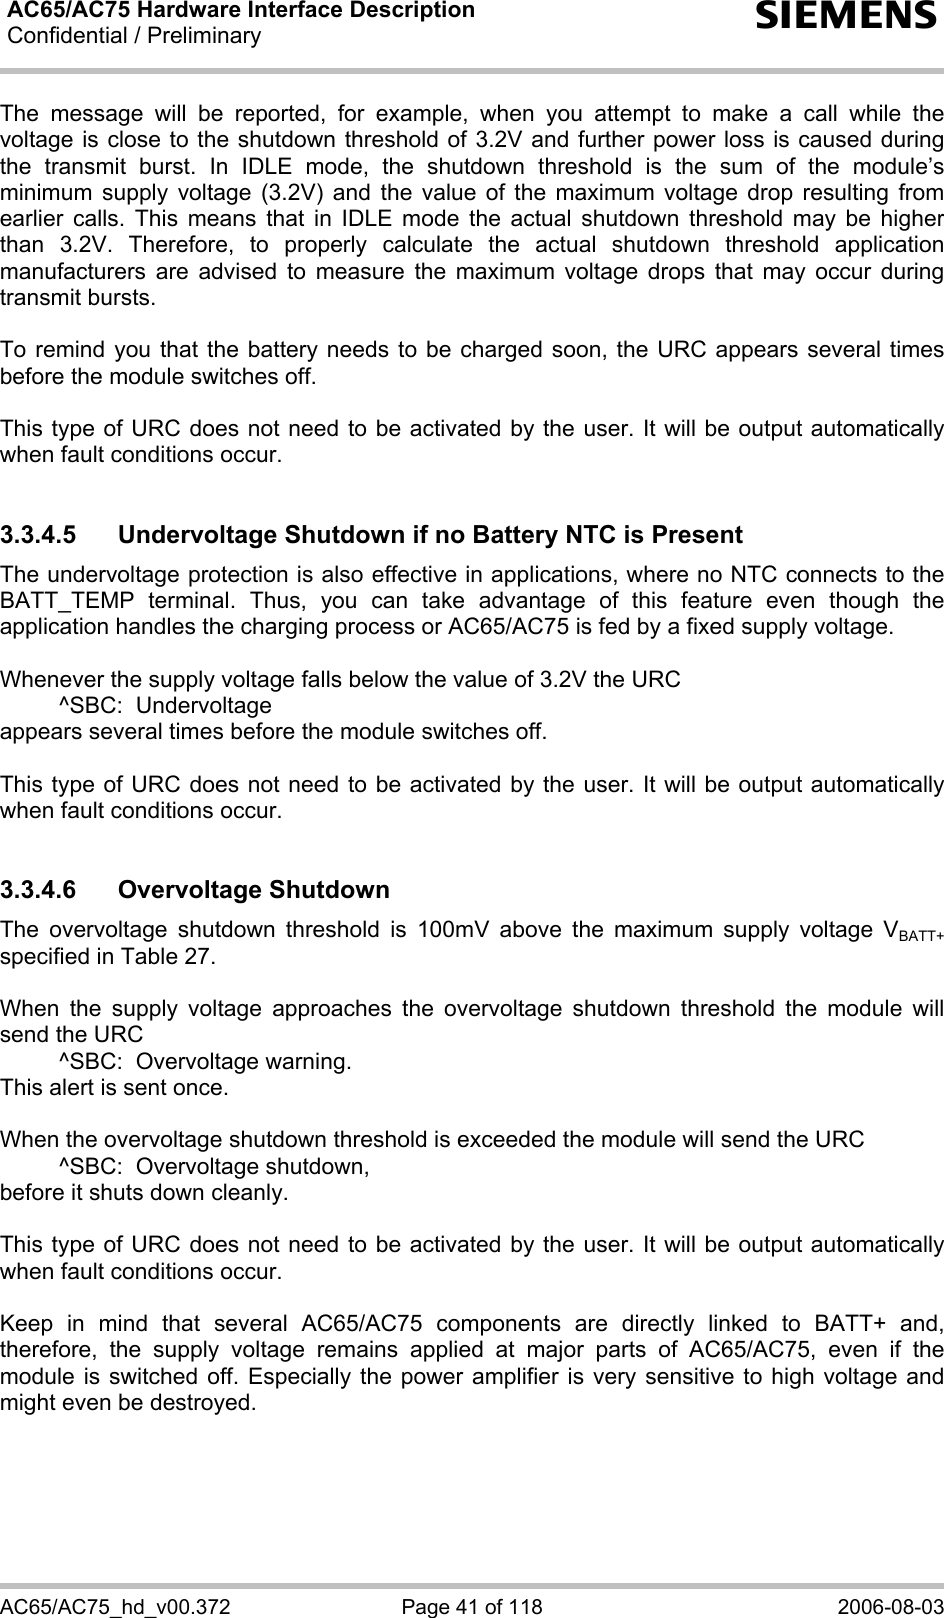 AC65/AC75 Hardware Interface Description Confidential / Preliminary  s AC65/AC75_hd_v00.372  Page 41 of 118  2006-08-03 The message will be reported, for example, when you attempt to make a call while the voltage is close to the shutdown threshold of 3.2V and further power loss is caused during the transmit burst. In IDLE mode, the shutdown threshold is the sum of the module’s minimum supply voltage (3.2V) and the value of the maximum voltage drop resulting from earlier calls. This means that in IDLE mode the actual shutdown threshold may be higher than 3.2V. Therefore, to properly calculate the actual shutdown threshold application manufacturers are advised to measure the maximum voltage drops that may occur during transmit bursts.  To remind you that the battery needs to be charged soon, the URC appears several times before the module switches off.   This type of URC does not need to be activated by the user. It will be output automatically when fault conditions occur.  3.3.4.5  Undervoltage Shutdown if no Battery NTC is Present The undervoltage protection is also effective in applications, where no NTC connects to the BATT_TEMP terminal. Thus, you can take advantage of this feature even though the application handles the charging process or AC65/AC75 is fed by a fixed supply voltage.   Whenever the supply voltage falls below the value of 3.2V the URC    ^SBC:  Undervoltage appears several times before the module switches off.  This type of URC does not need to be activated by the user. It will be output automatically when fault conditions occur.  3.3.4.6 Overvoltage Shutdown The overvoltage shutdown threshold is 100mV above the maximum supply voltage VBATT+ specified in Table 27.   When the supply voltage approaches the overvoltage shutdown threshold the module will send the URC    ^SBC:  Overvoltage warning. This alert is sent once.  When the overvoltage shutdown threshold is exceeded the module will send the URC   ^SBC:  Overvoltage shutdown, before it shuts down cleanly.  This type of URC does not need to be activated by the user. It will be output automatically when fault conditions occur.  Keep in mind that several AC65/AC75 components are directly linked to BATT+ and, therefore, the supply voltage remains applied at major parts of AC65/AC75, even if the module is switched off. Especially the power amplifier is very sensitive to high voltage and might even be destroyed.    